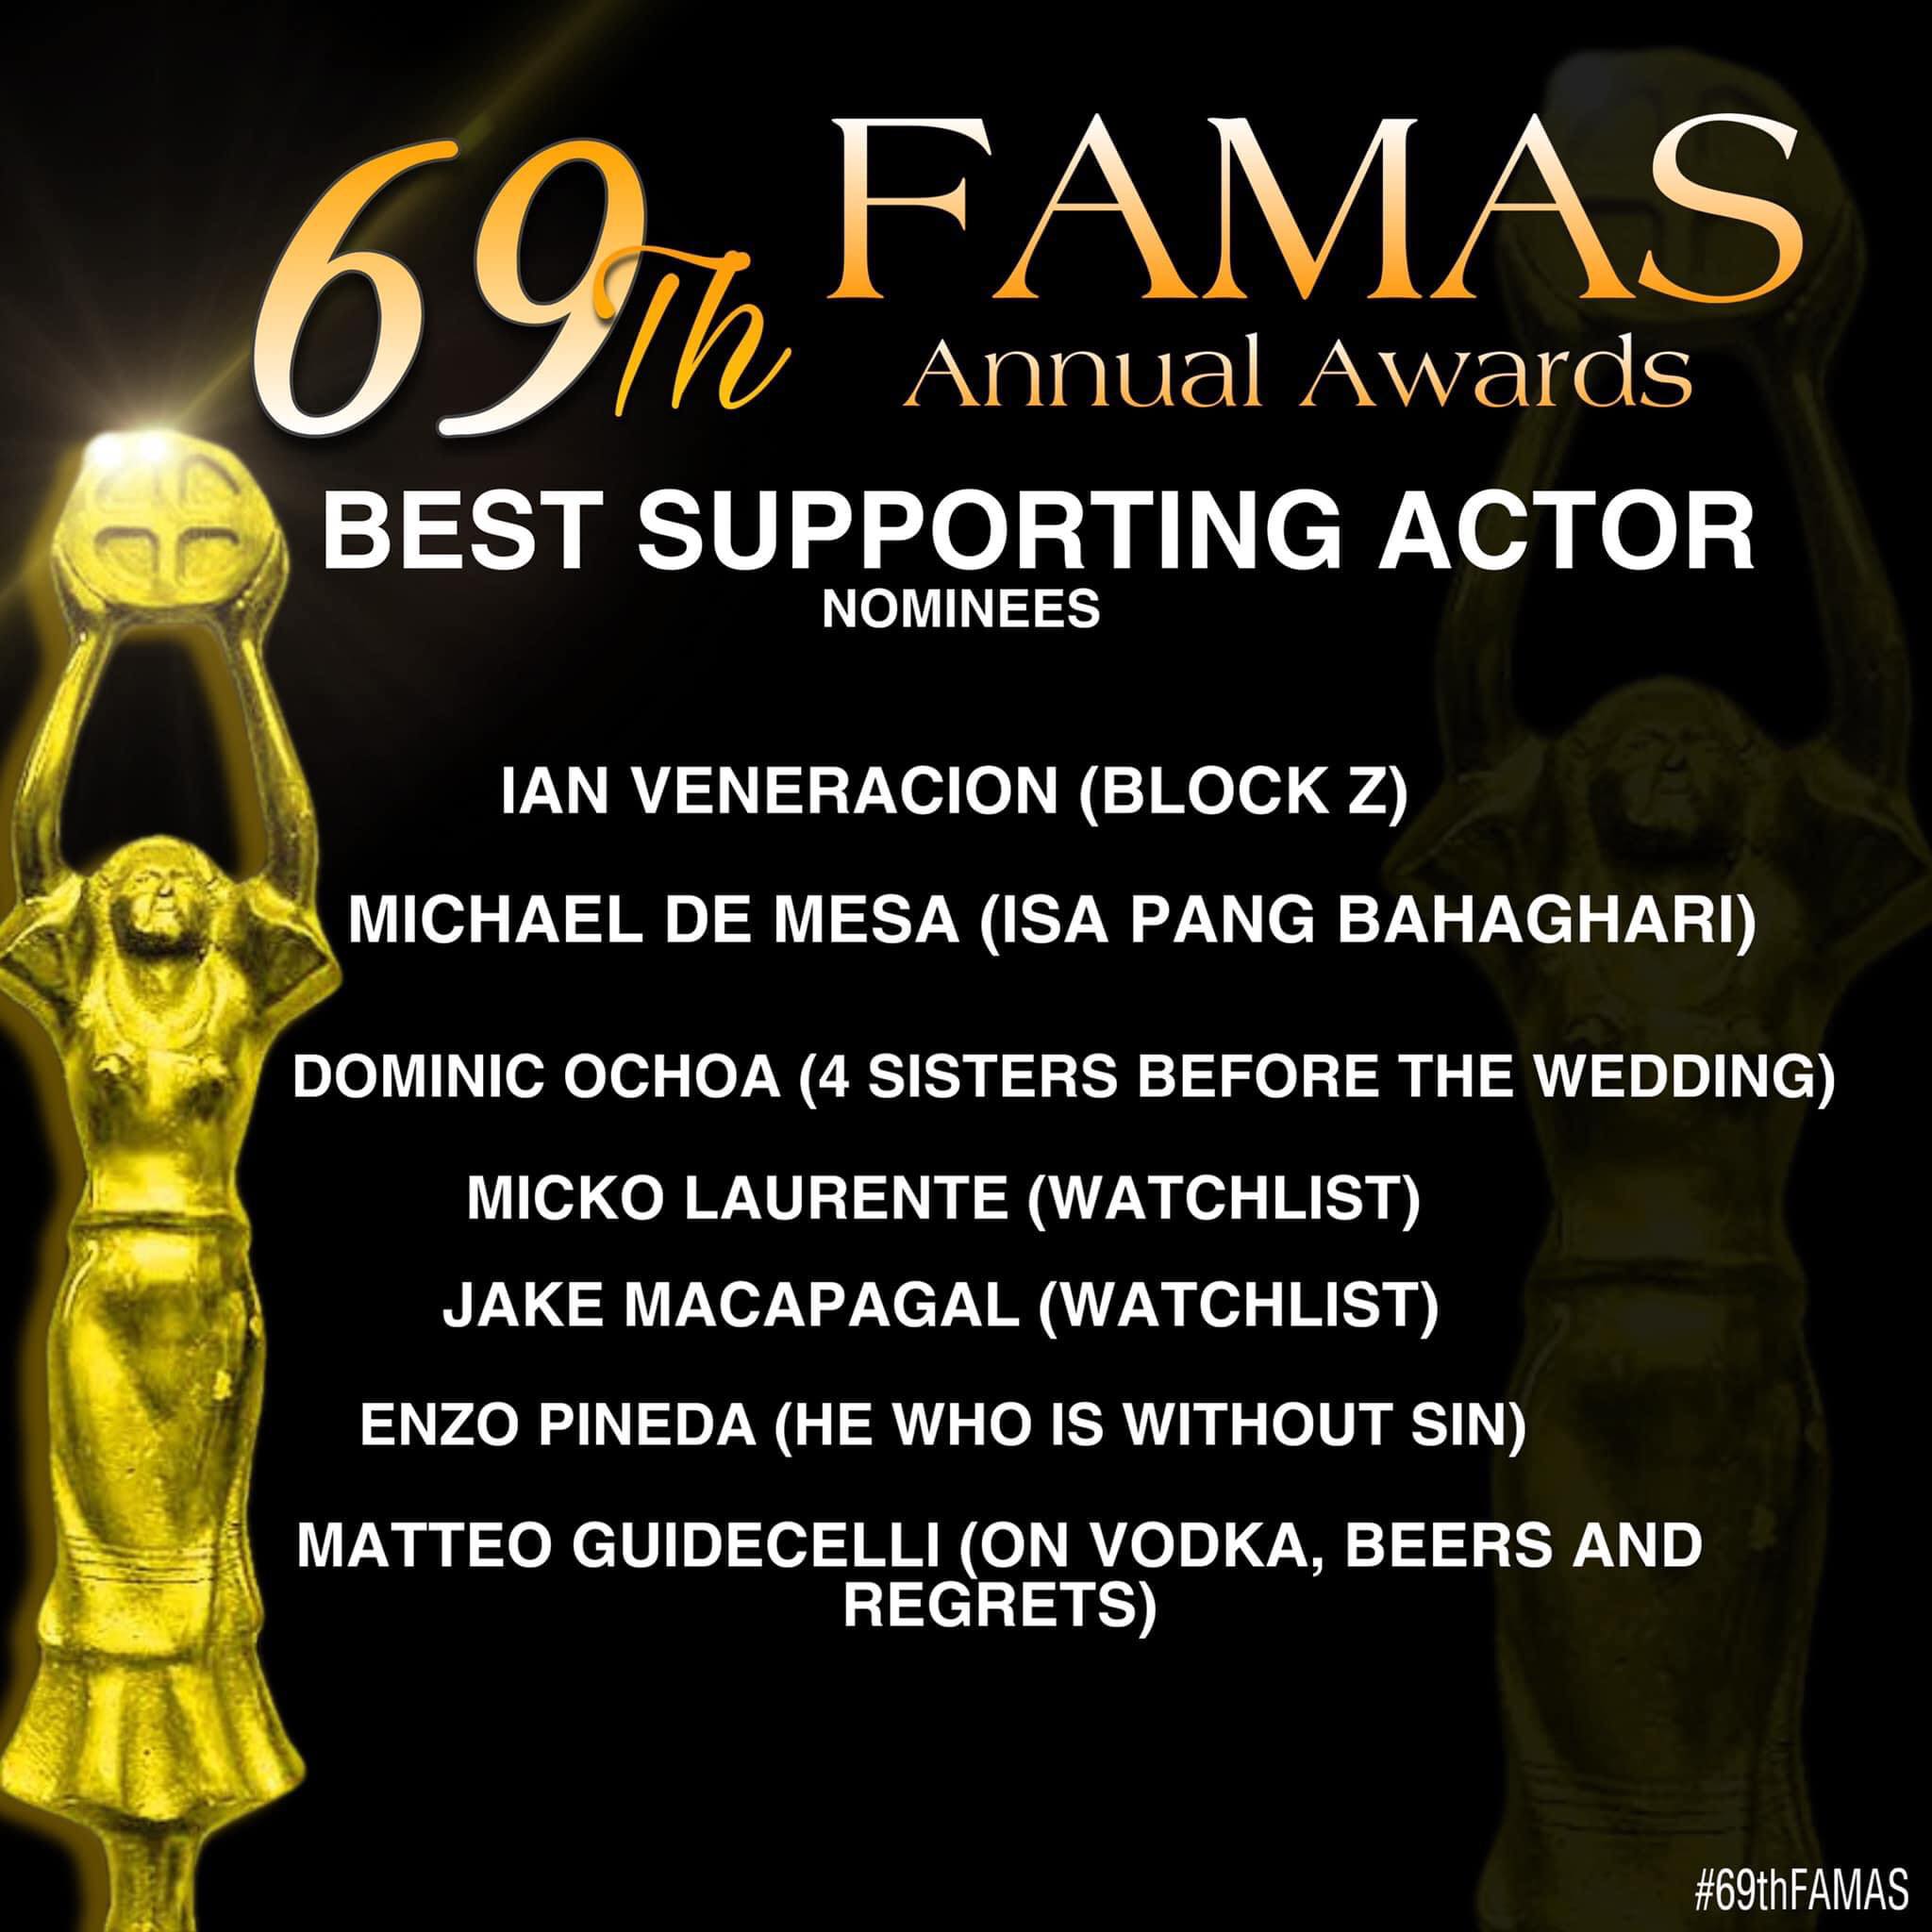 69th famas best supporting actor